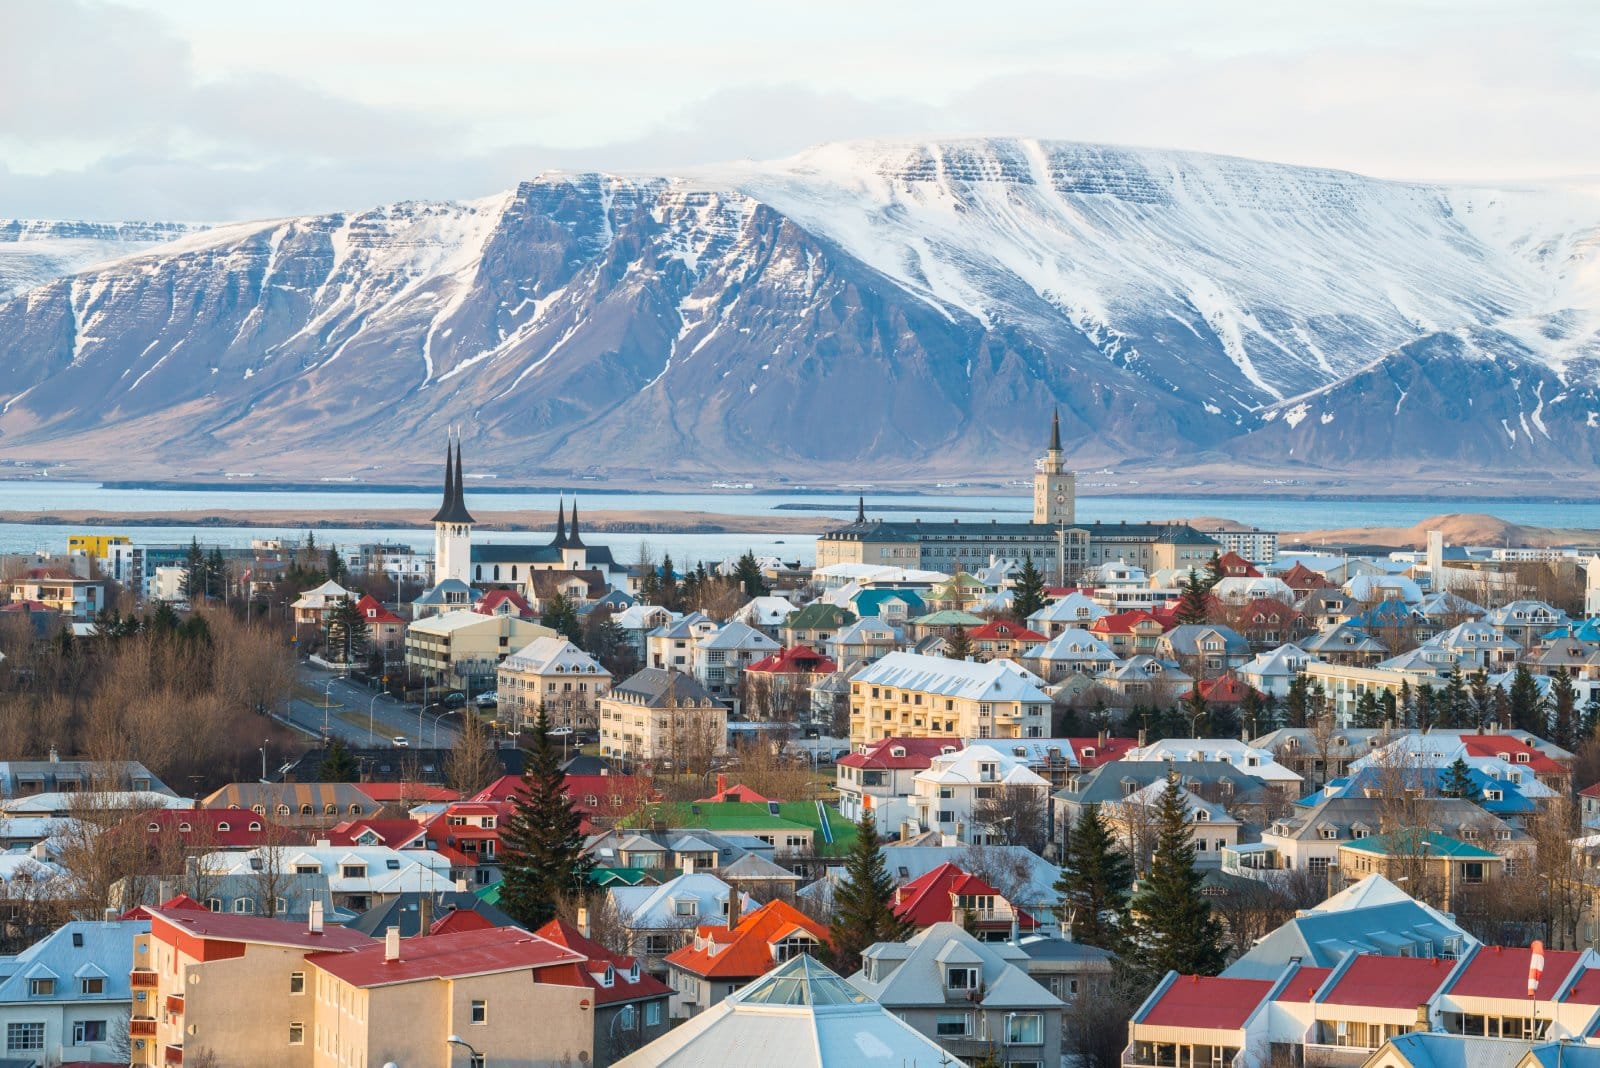 <p><span>Aquarius, known for their independence, innovation, and humanitarianism, will resonate with the progressive spirit of Reykjavik, Iceland. The city’s commitment to sustainability, vibrant arts scene, and welcoming attitude towards diversity and innovation mirror Aquarius’s values.</span></p> <p><span>From exploring cutting-edge design and architecture to relaxing in geothermal spas and witnessing the natural wonders of the Northern Lights, Reykjavik offers a blend of modernity and nature that appeals to the Aquarian spirit.</span></p> <p><b>Insider’s Tip: </b><span>Don’t miss the chance to swim in one of Reykjavik’s geothermal pools. This quintessential Icelandic experience combines relaxation with social interaction.</span></p> <p><b>When to Travel: </b><span>Visit from September to March for the best chance to see the Northern Lights, one of Iceland’s most spectacular natural phenomena.</span></p> <p><b>How to Get There: </b><span>Keflavik International Airport is Iceland’s main airport, located about 50 minutes from Reykjavik. Regular bus services and rental cars are available to reach the city center.</span></p>